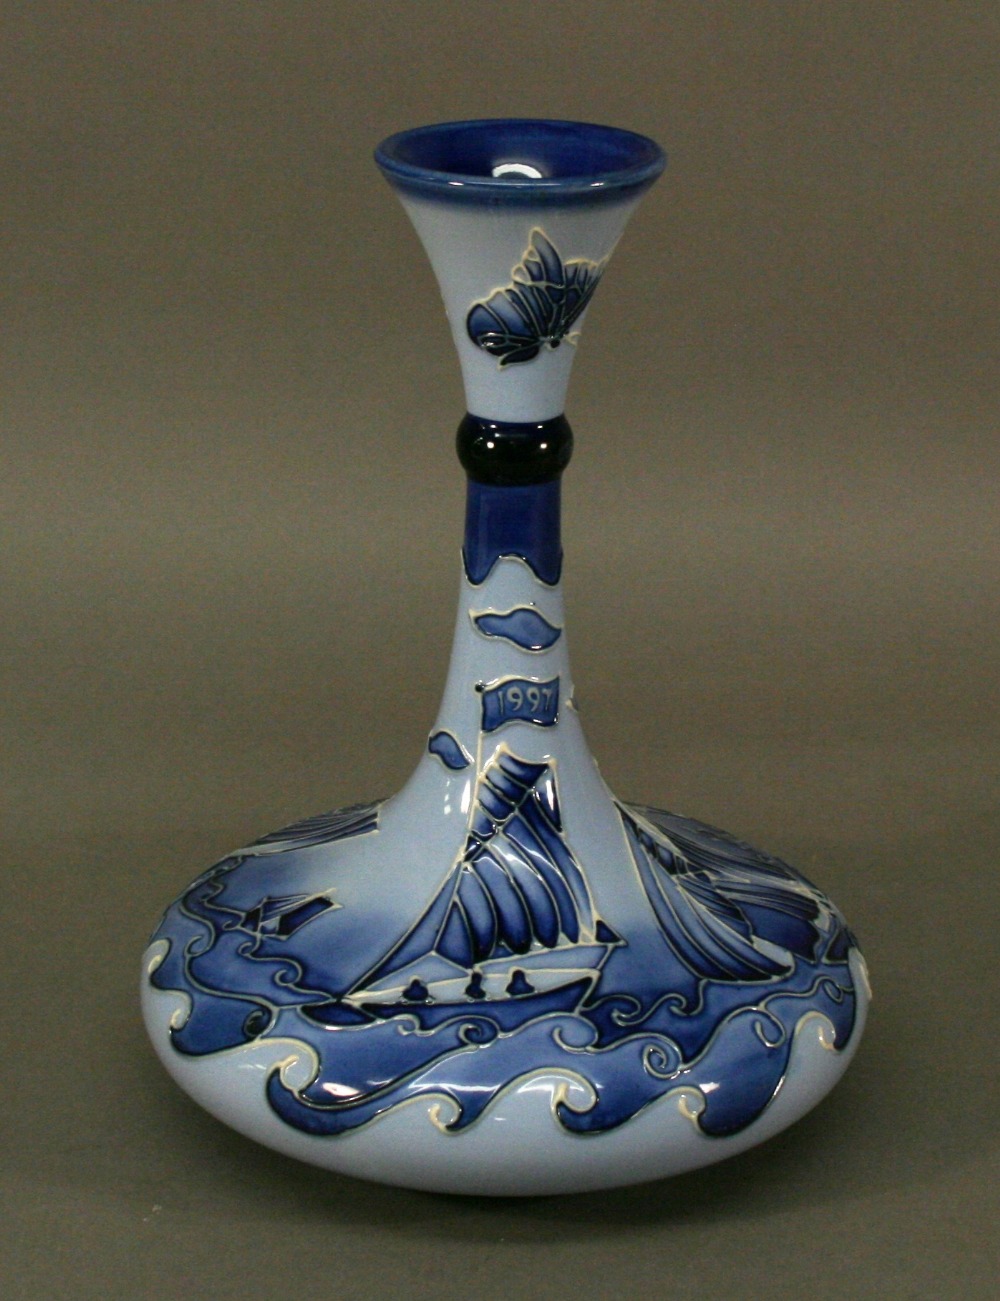 A MOORCROFT POTTERY 'FLORAN YACHT' PATTERN VASE produced for the 1897-1997 centenary, tube-lined